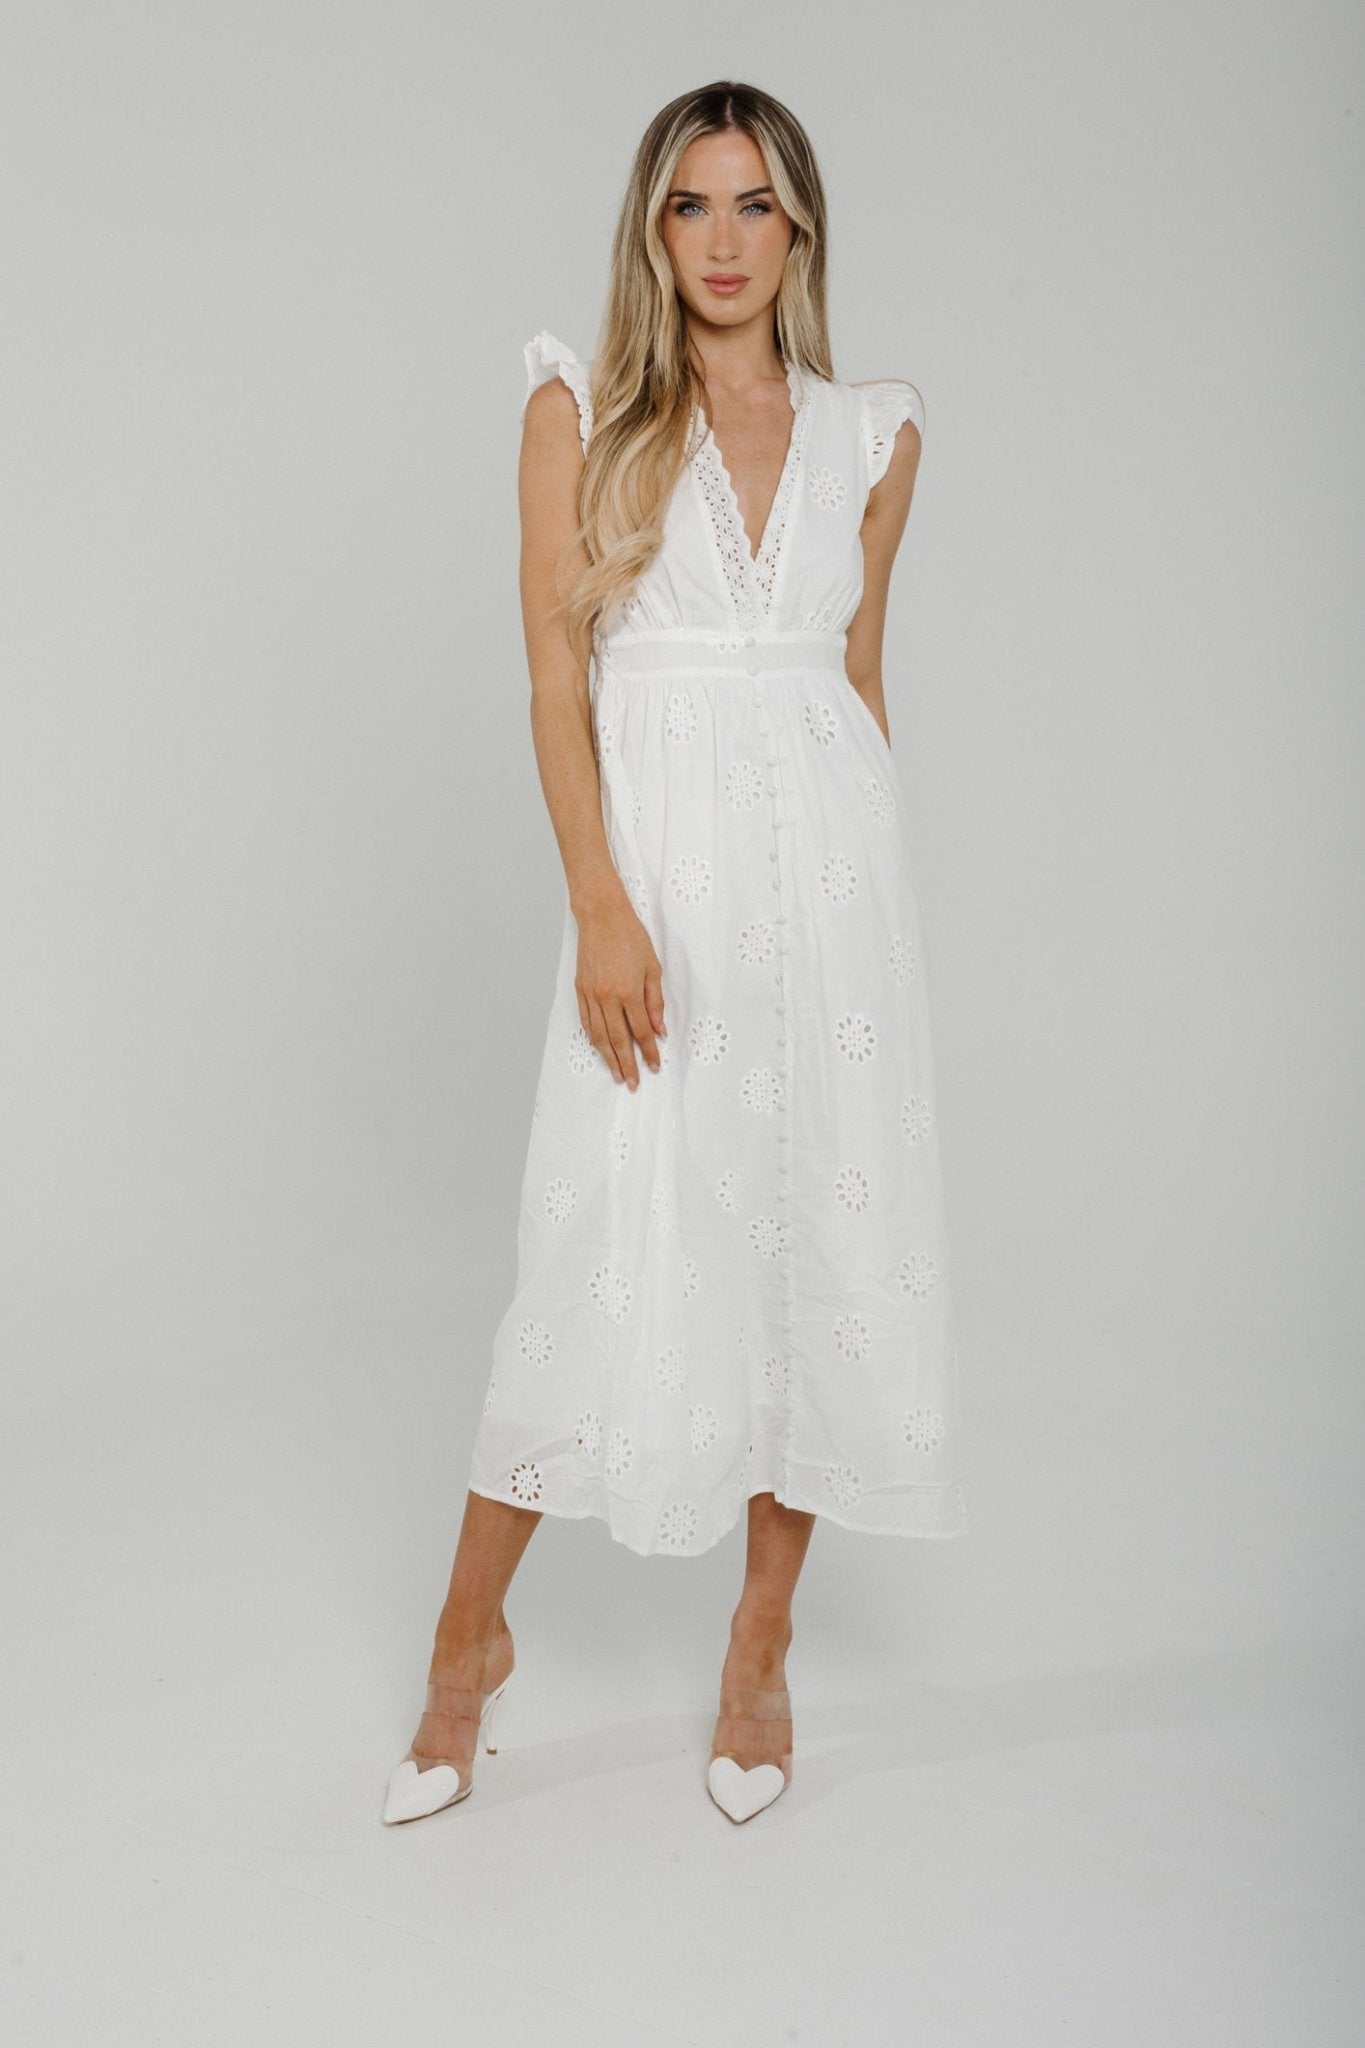 Holly Embroidered Sleeveless Dress In White - The Walk in Wardrobe